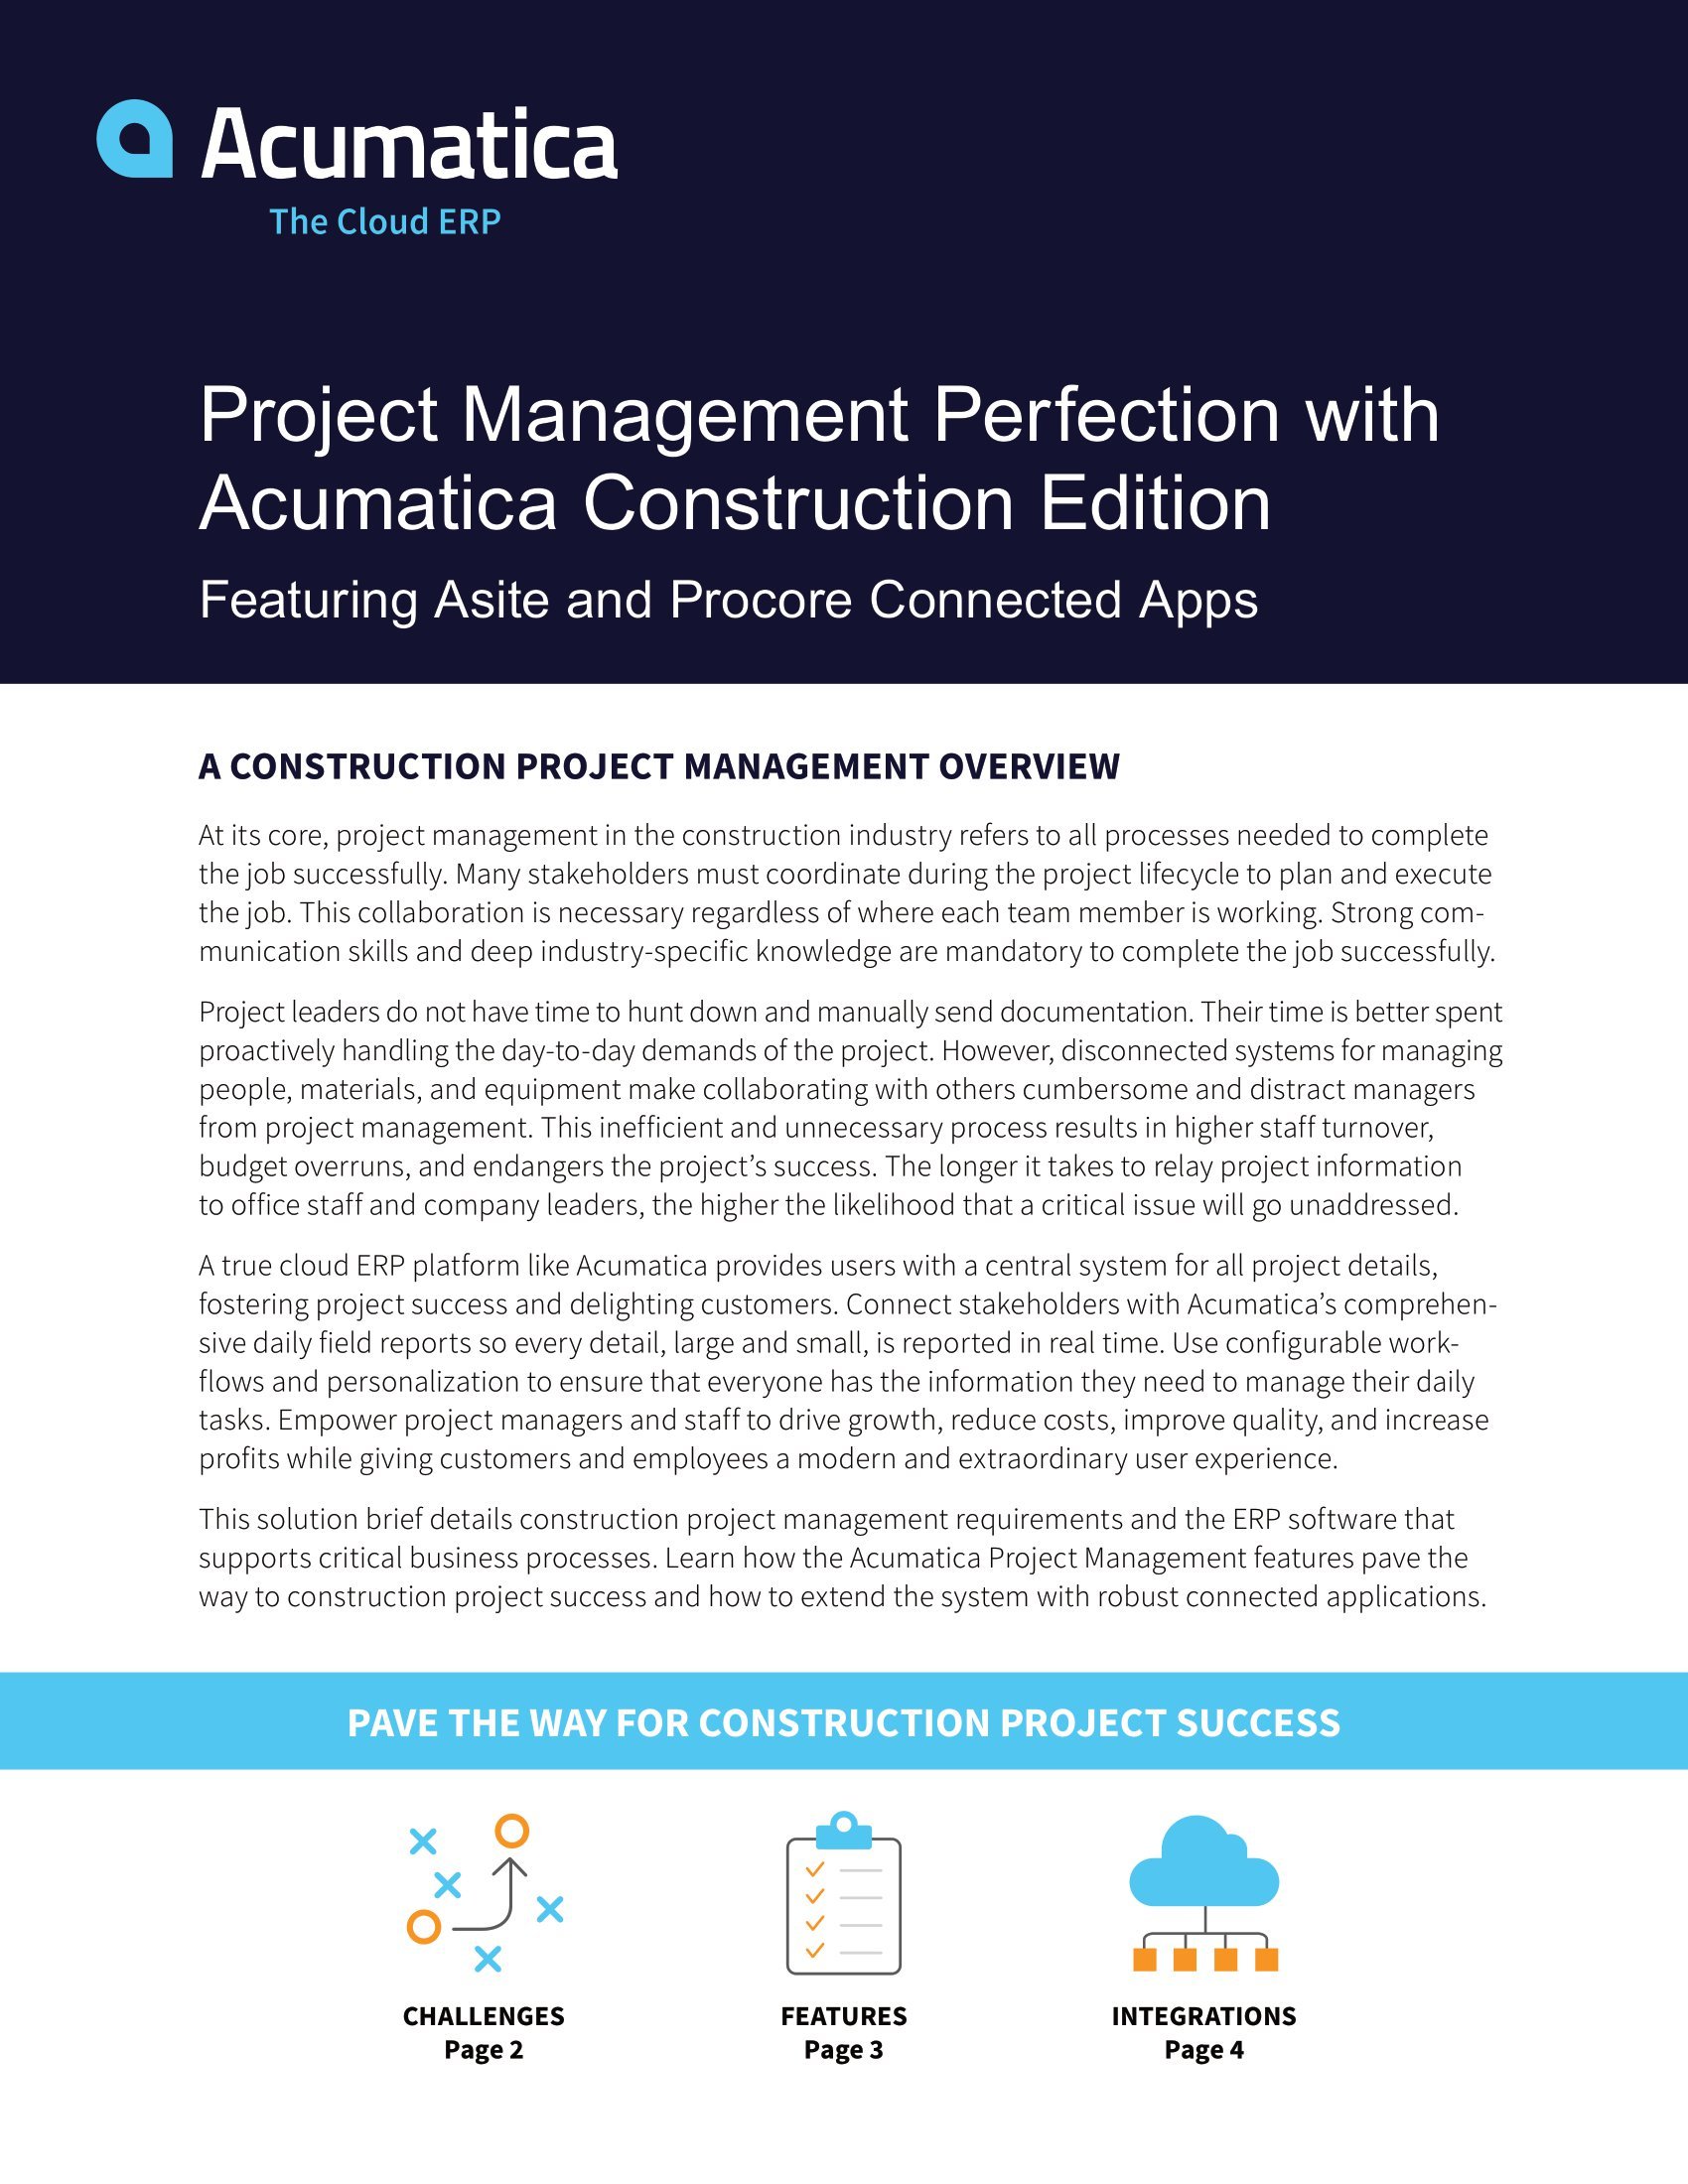 What Do Construction Project Managers Need to Succeed? A Centralized, Extensible System. 